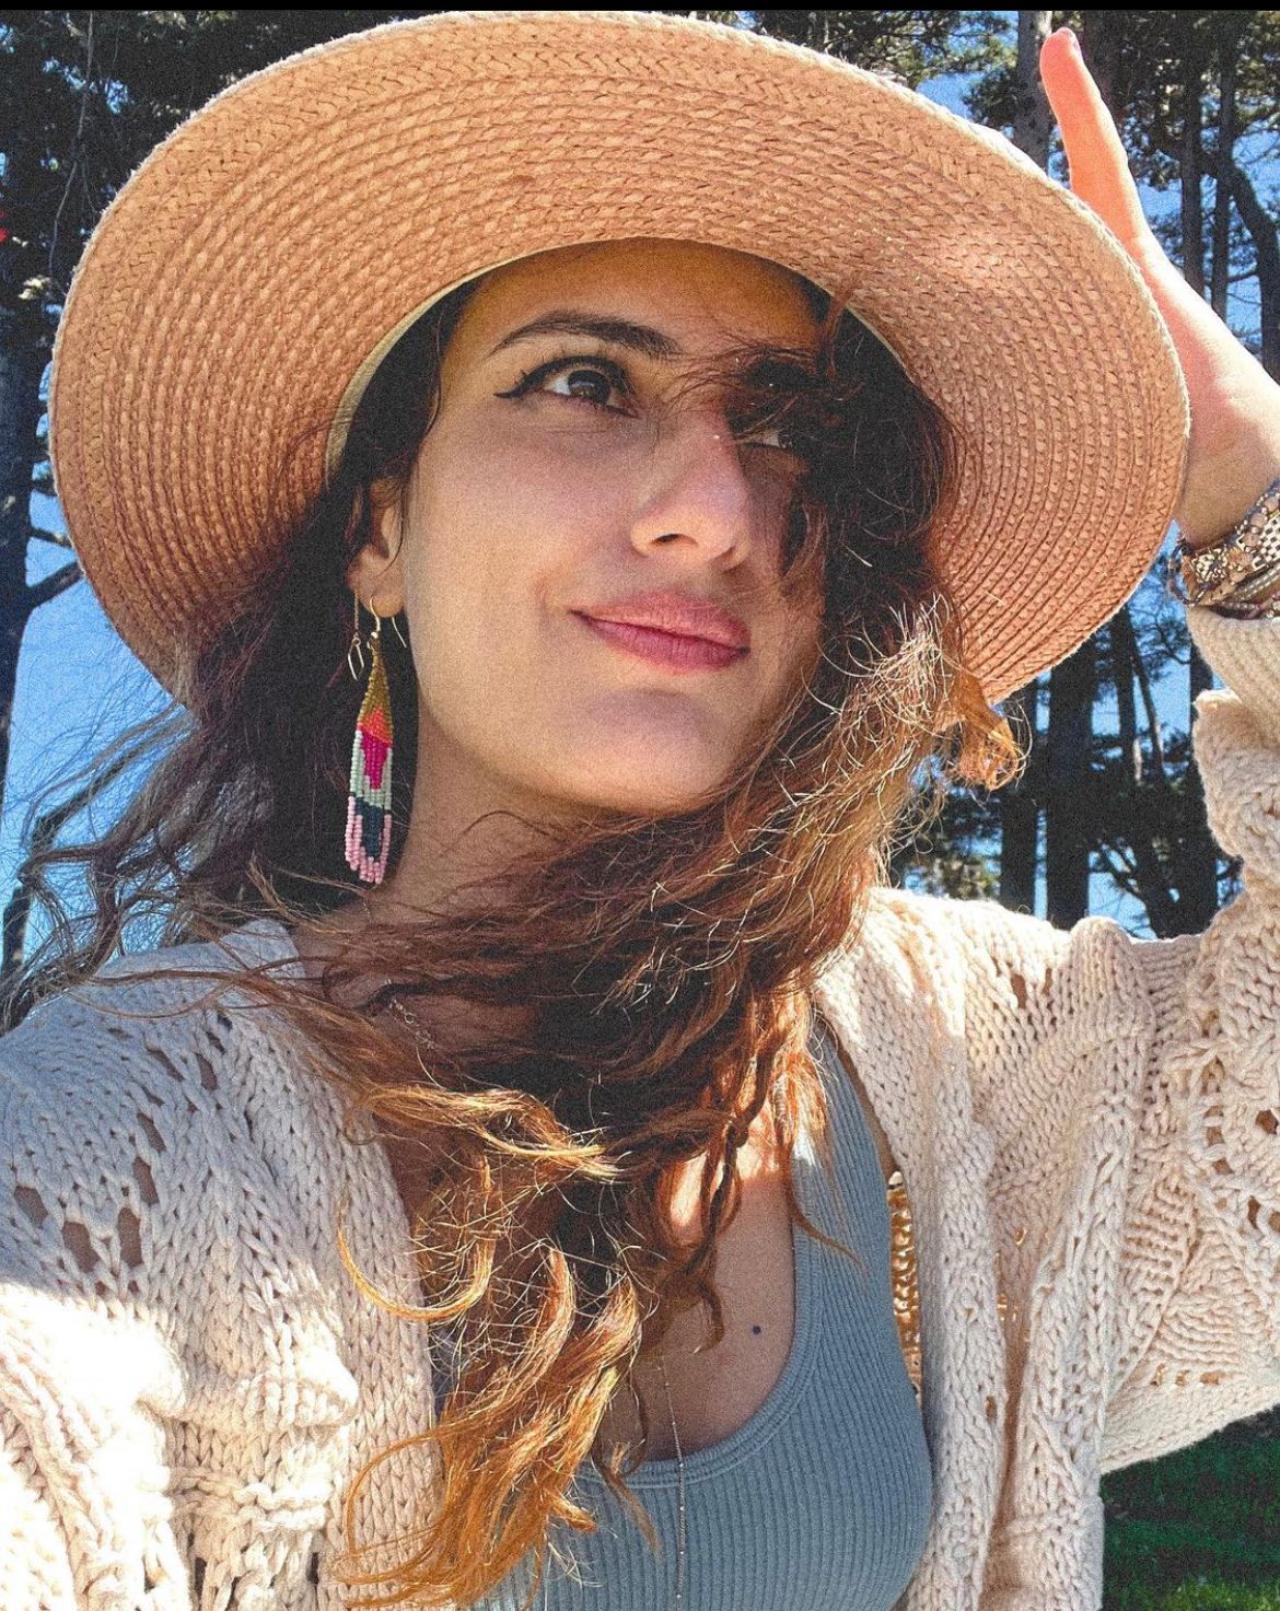 In her first look, Fatima Sana Shaikh's outfit features a ribbed low-neck top, a baggy knitted vintage sweater, and a jute sun hat. She kept her look simple yet very stylish and engaging